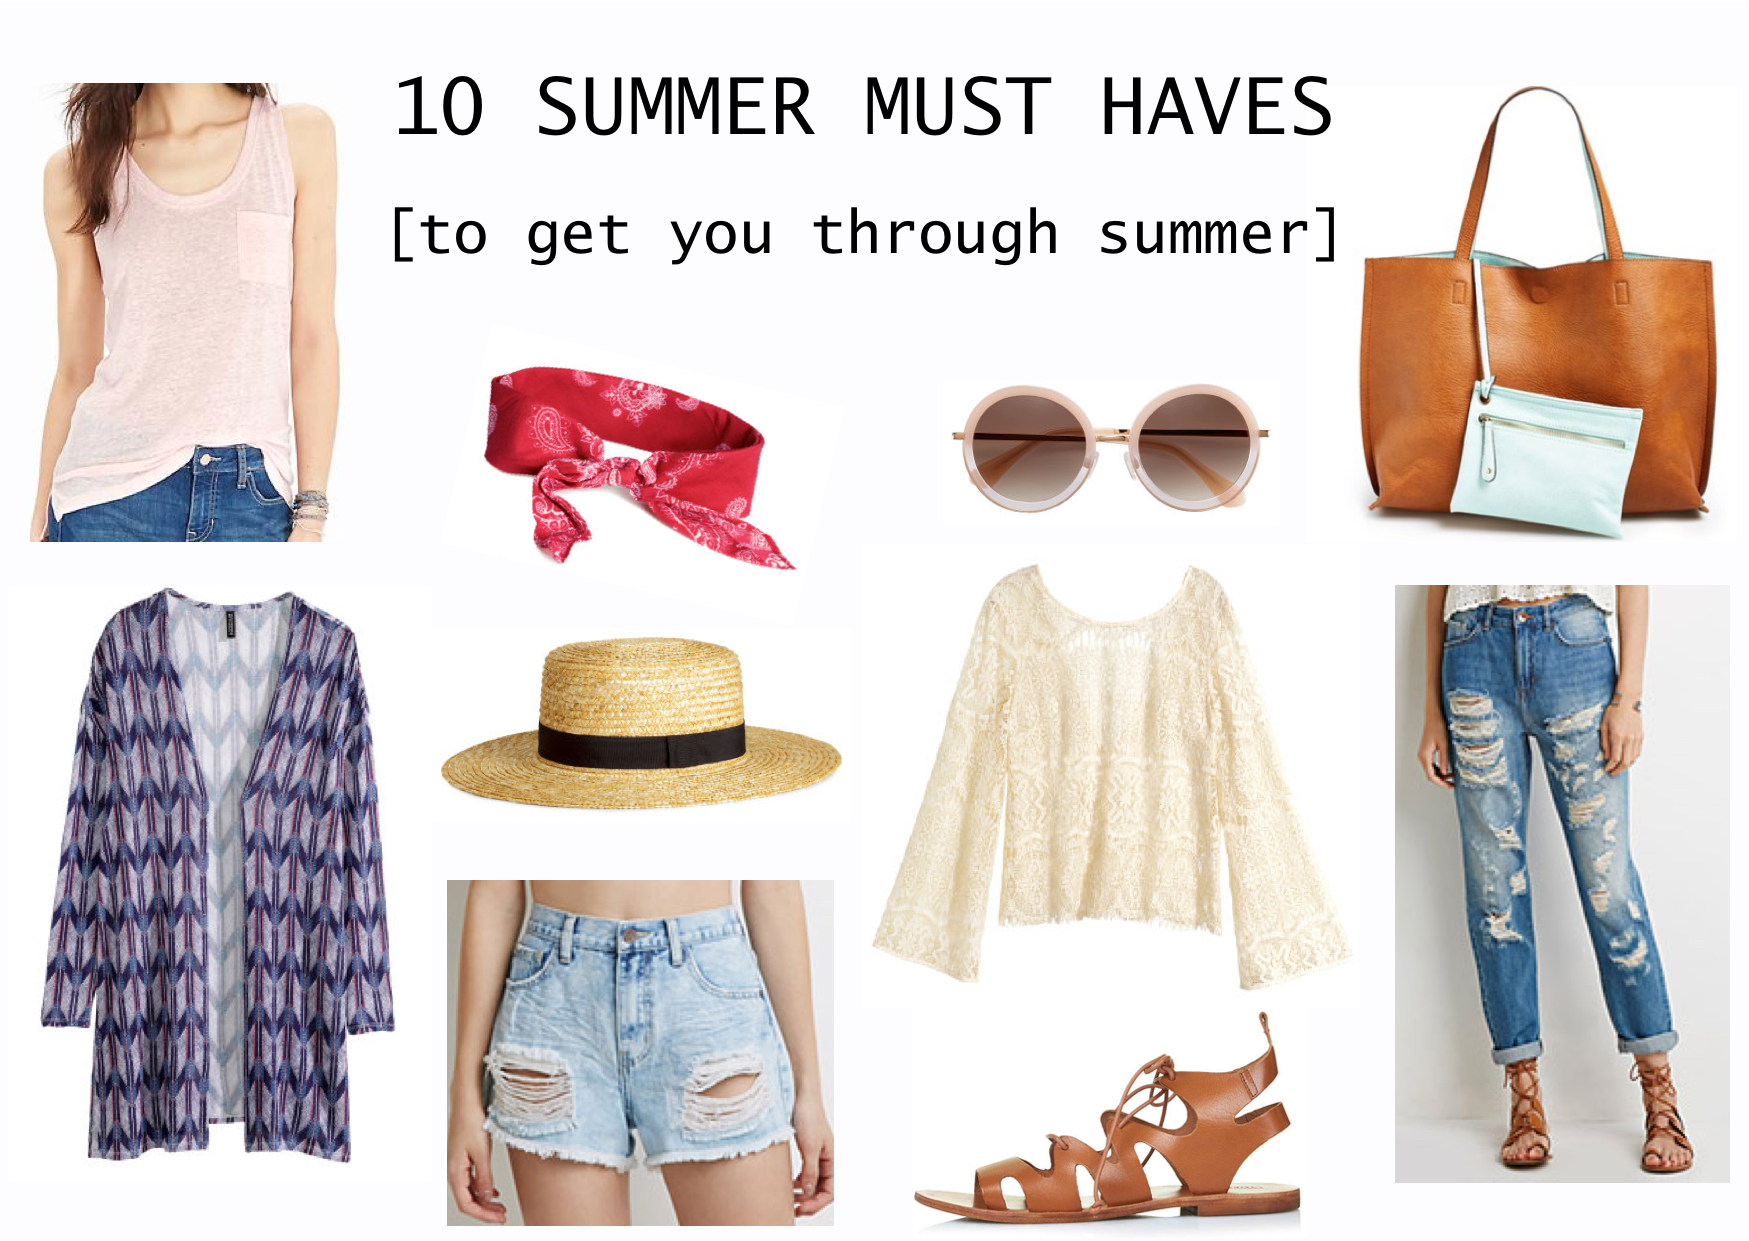 10 Summer Must Haves to get you through this summer - GLAMOURITA